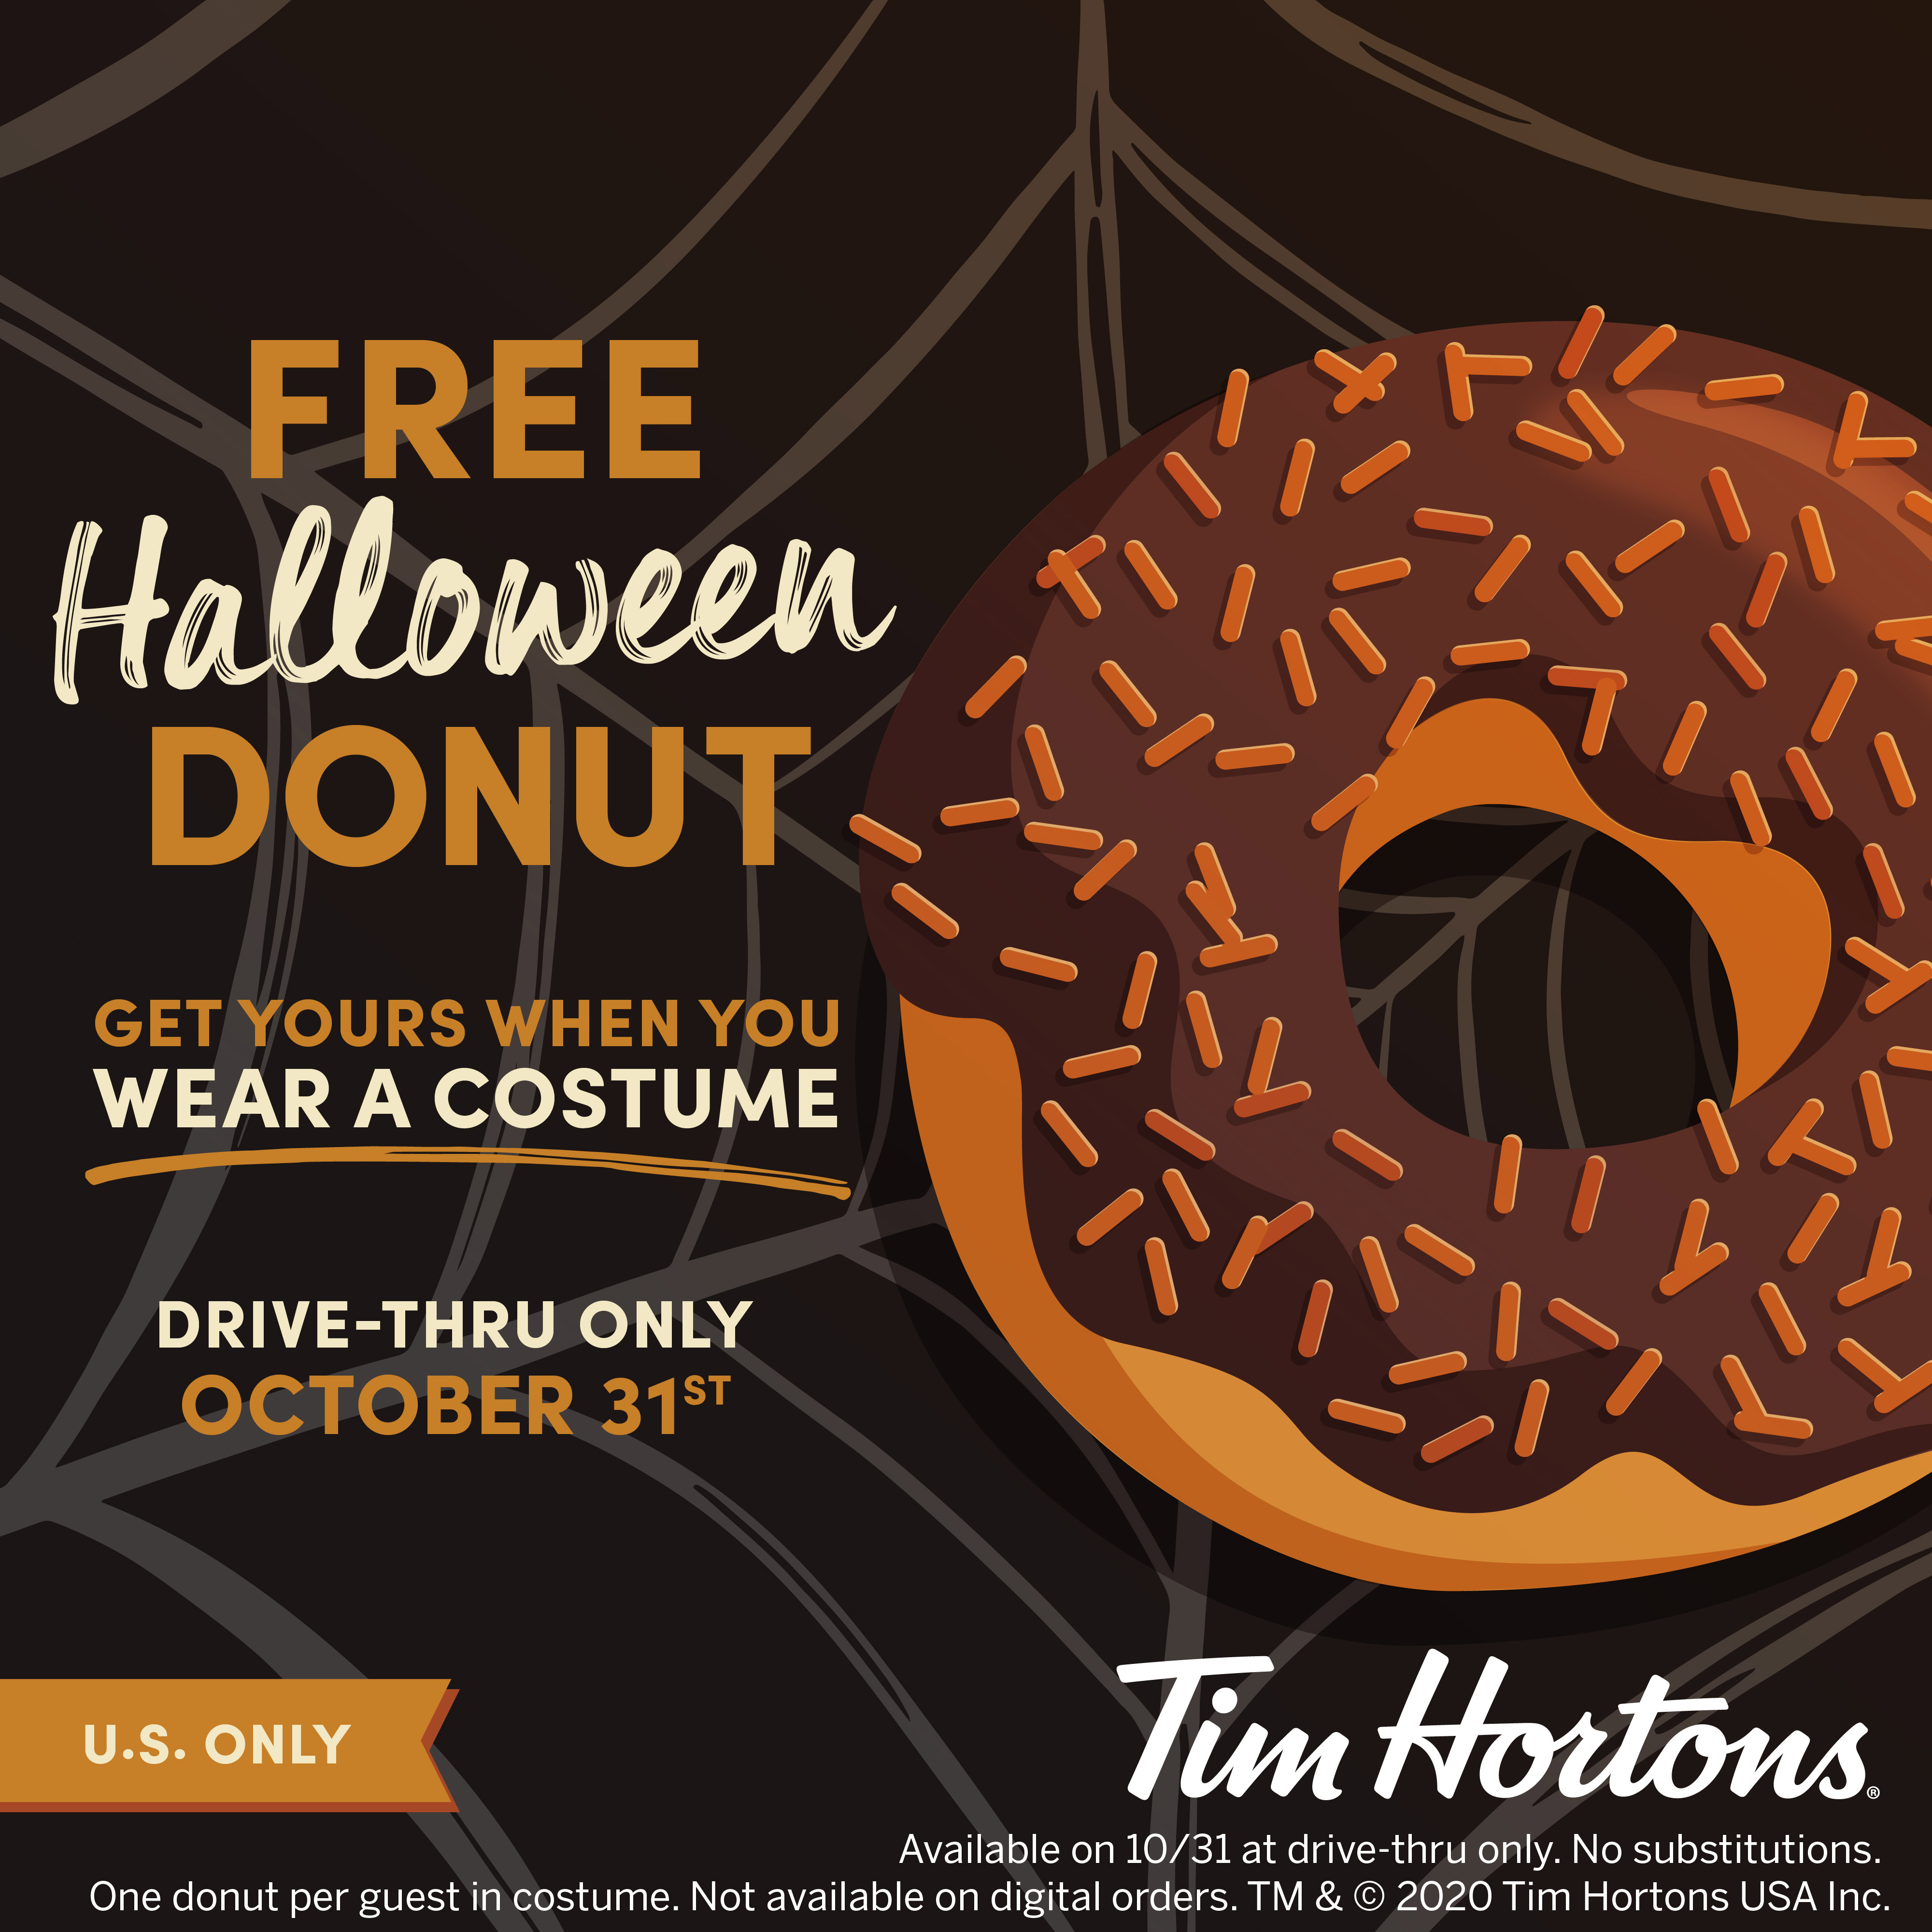 Tim Hortons Halloween Donuts At Certain Locations Are Perfect For The  Spooky Holiday - Narcity